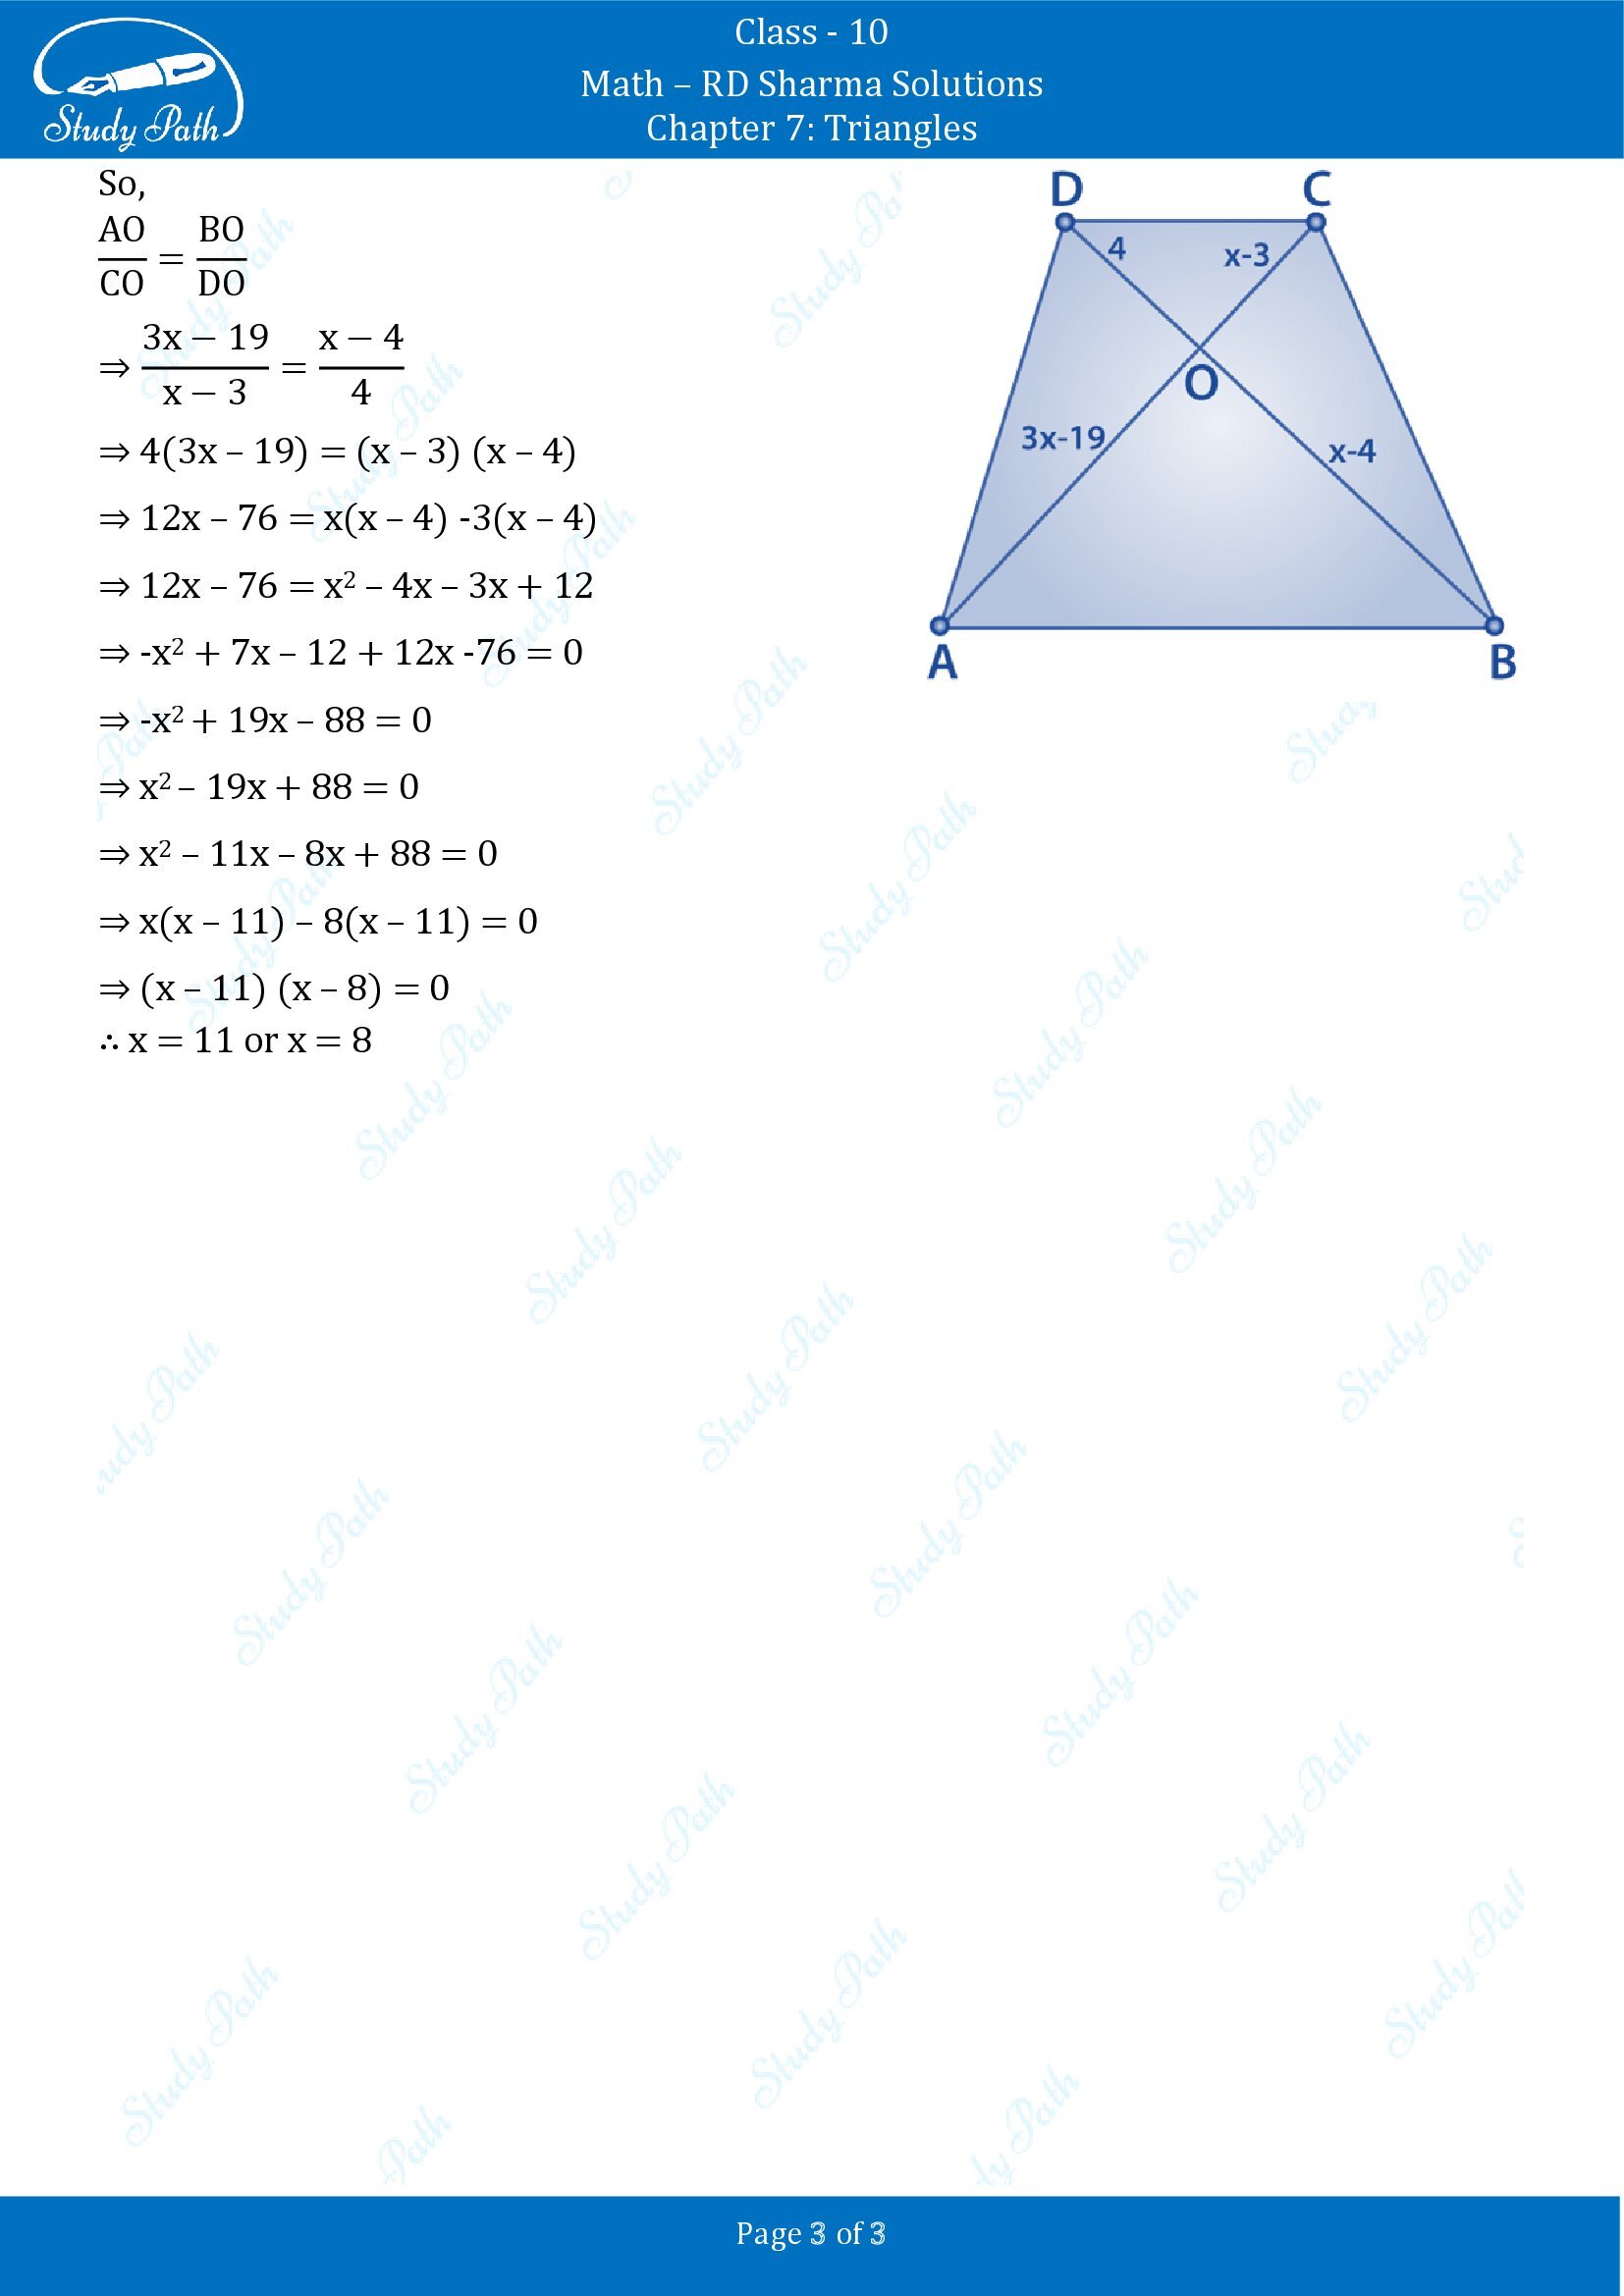 RD Sharma Solutions Class 10 Chapter 7 Triangles Exercise 7.4 00003